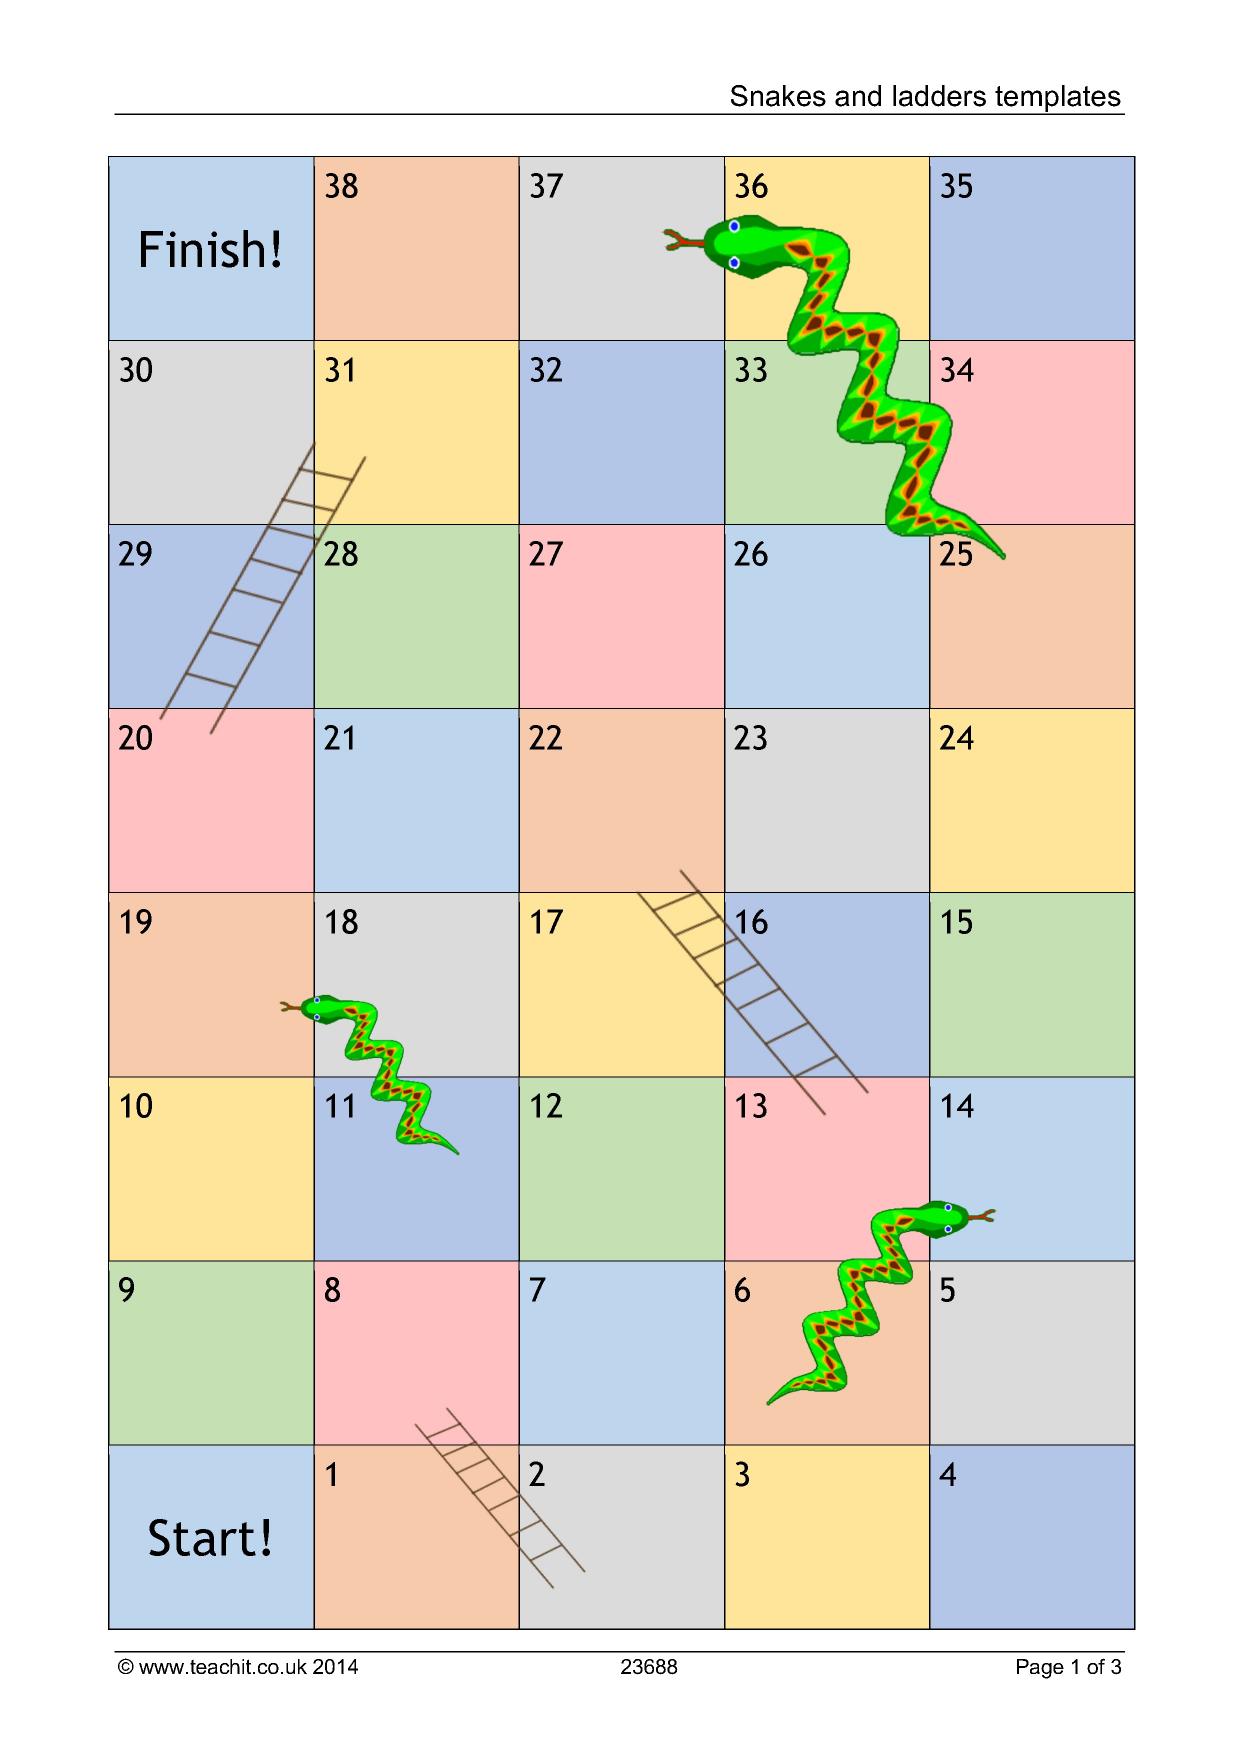 Snakes and ladders templates | Game | KS3-5 history | Teachit